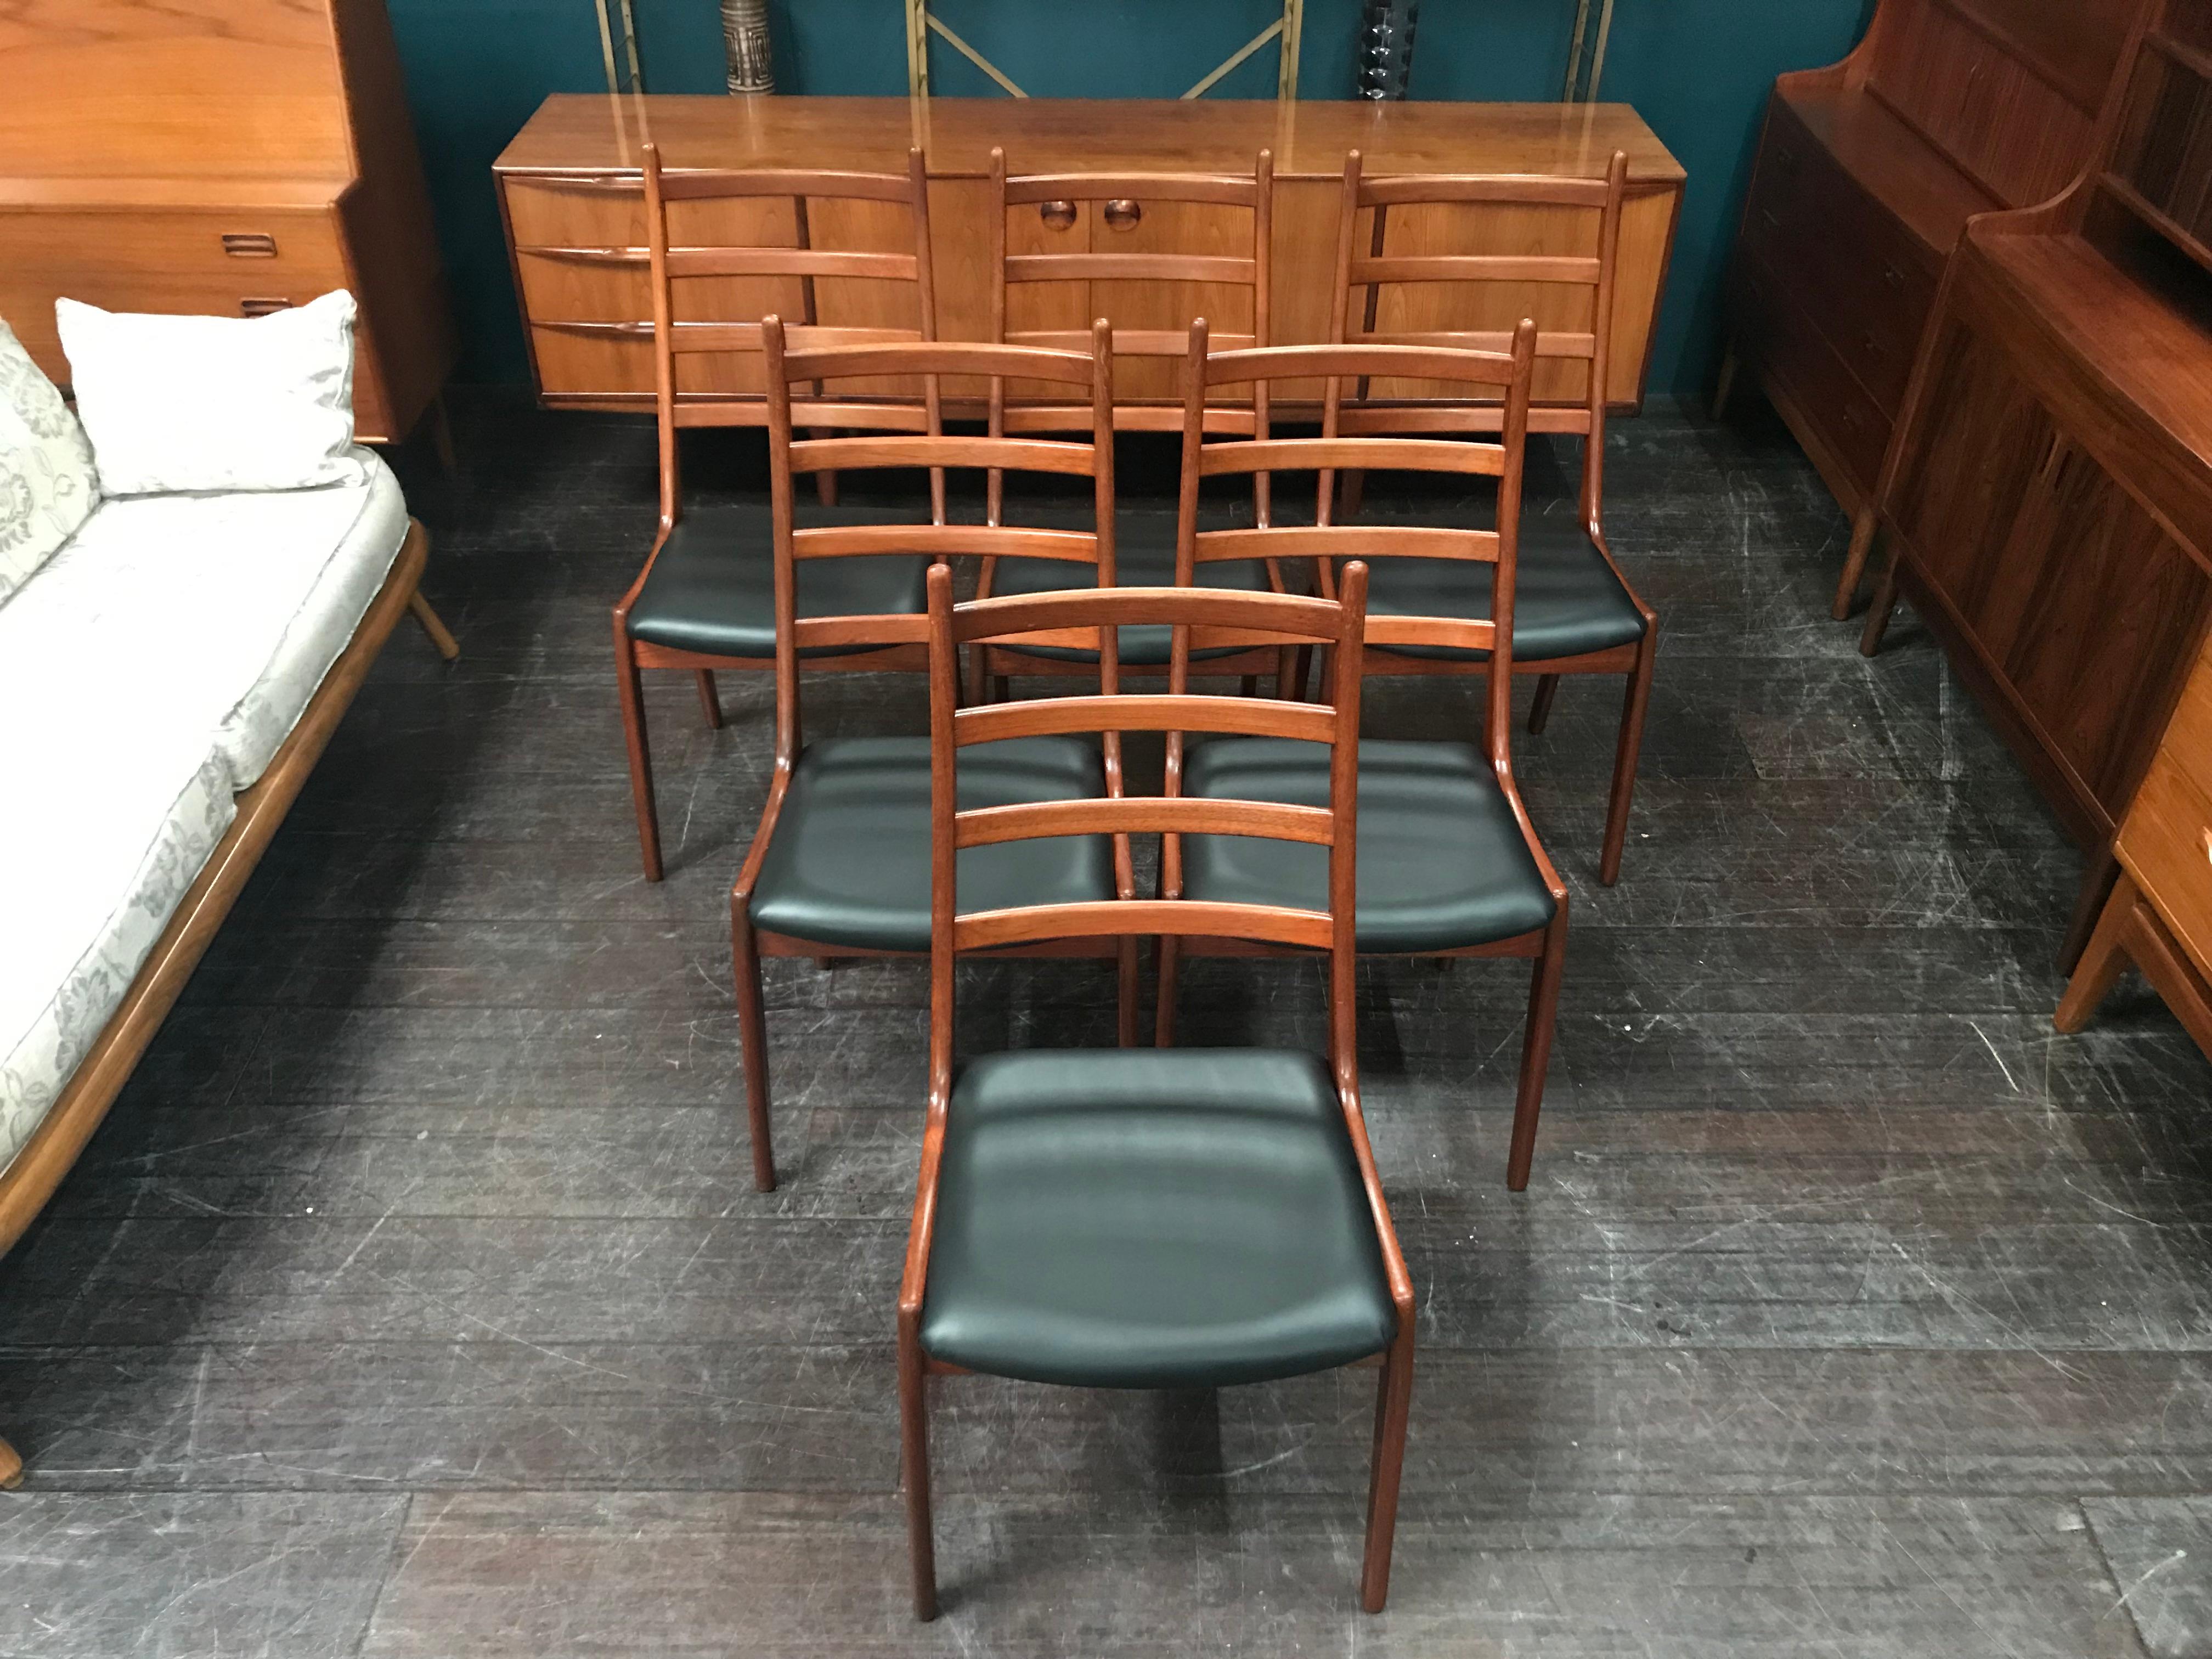 This is a set of very desirable midcentury dining chairs with black vinyl seat pads designed in Denmark in the 1960s by Kai Kristiansen and manufactured by Korup Stolefabrik. These beautiful high back chairs have a traditional 4 bar ladderback